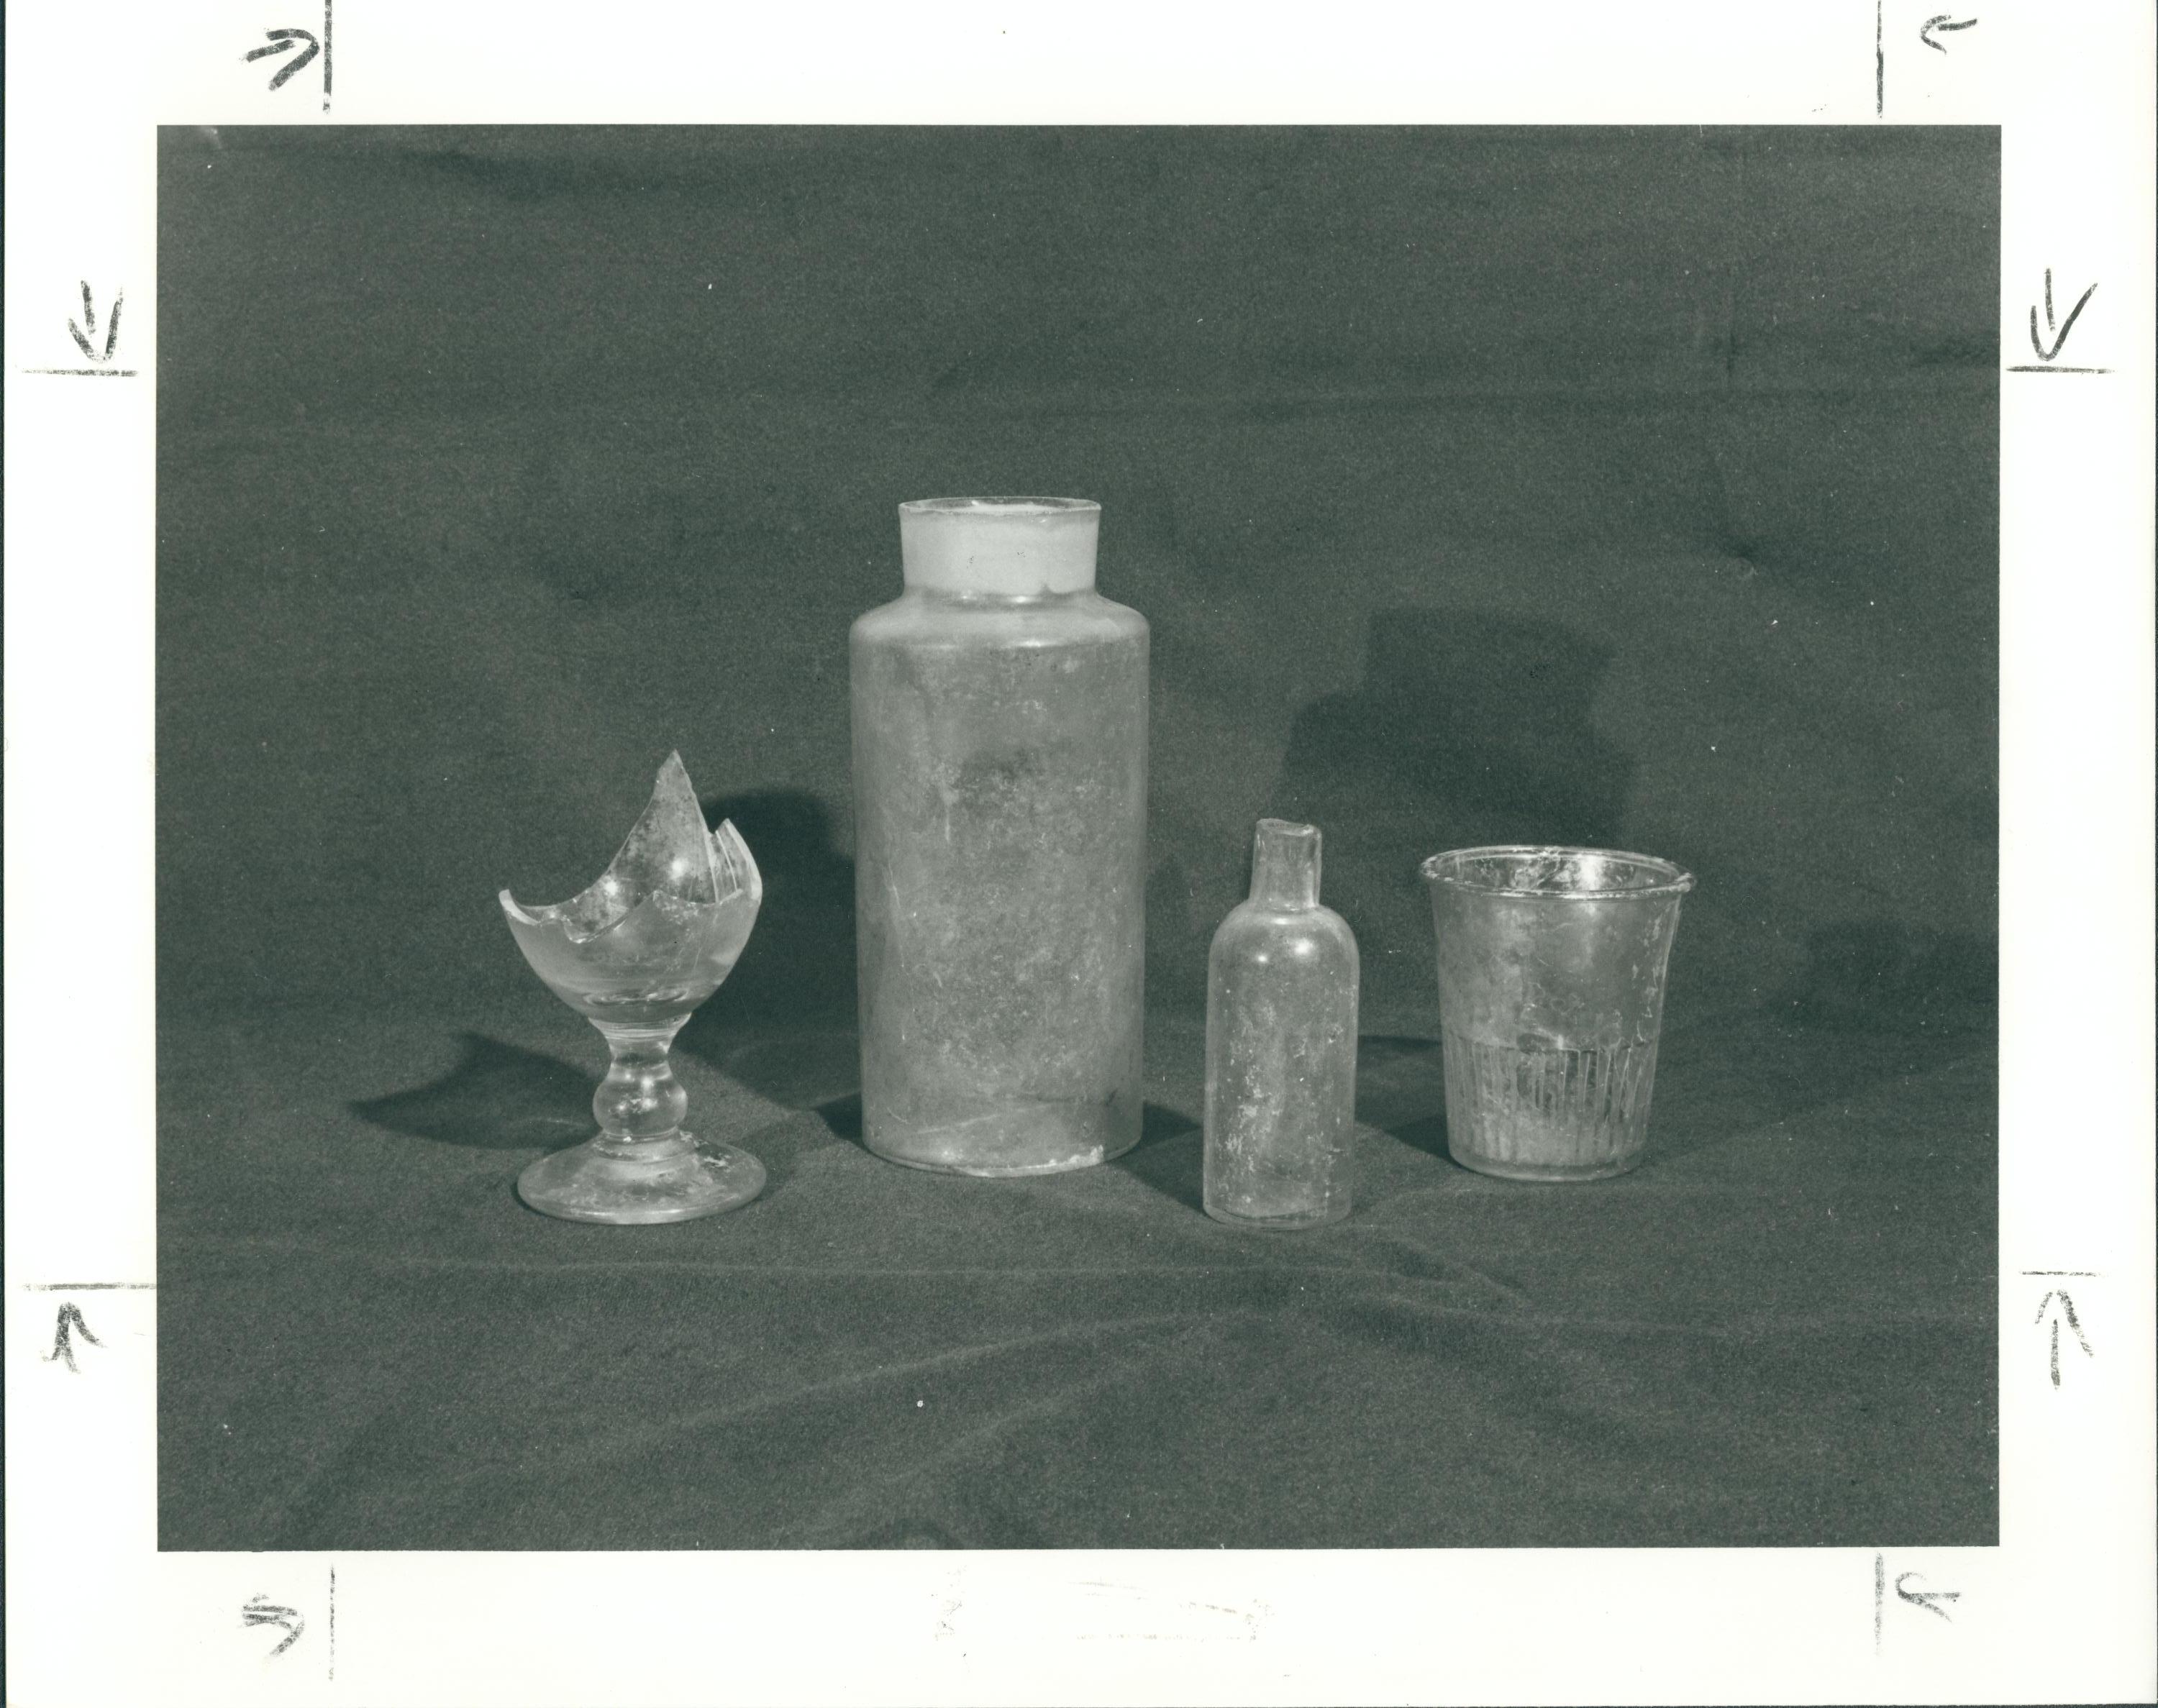 NA Hagen, archaeology, glass, bottle, cup